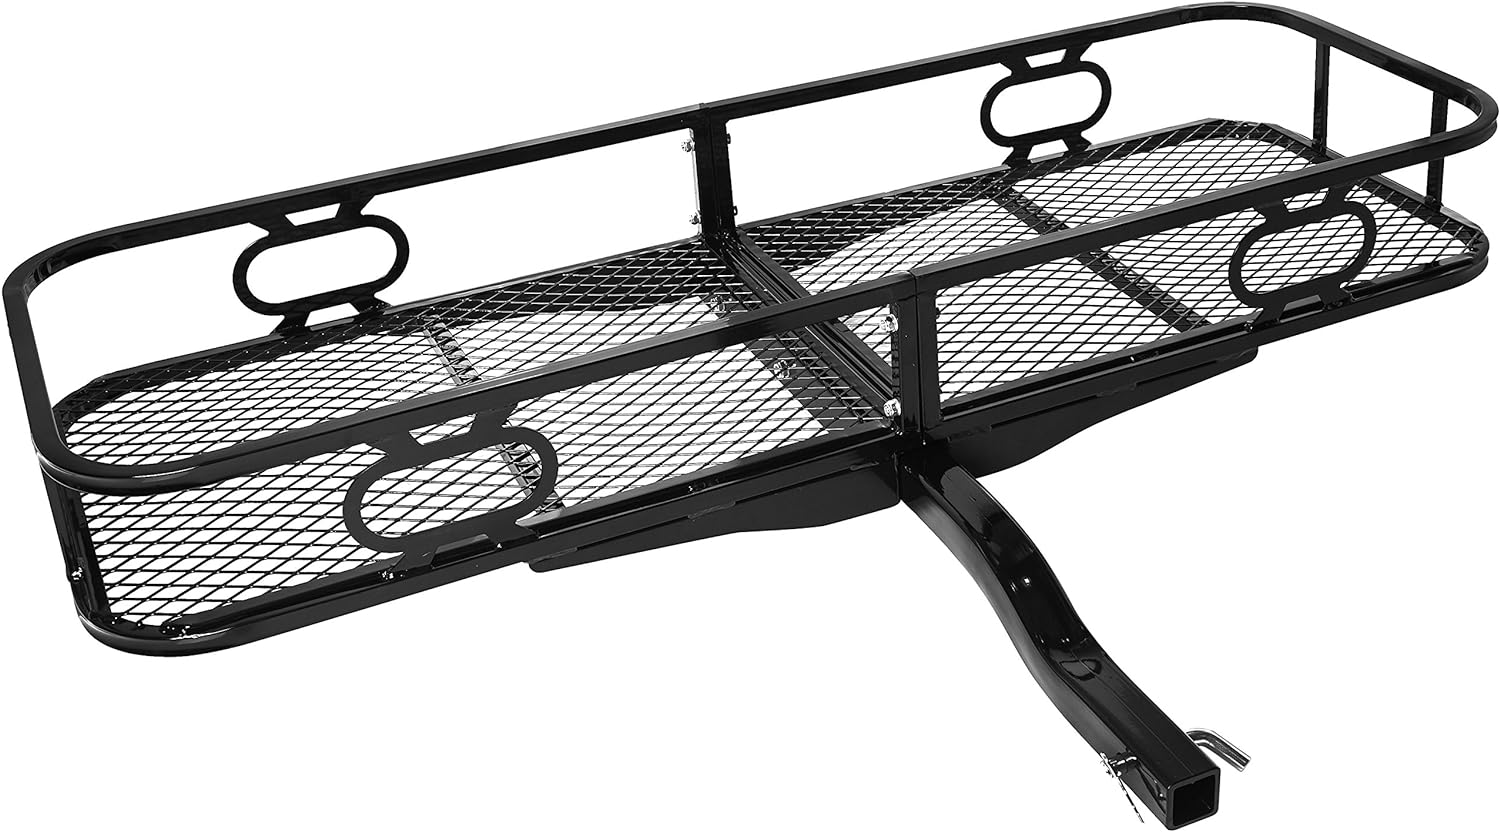  basics Hitch Cargo Carrier For 2 Inch Receivers, biggest hitch cargo carrier